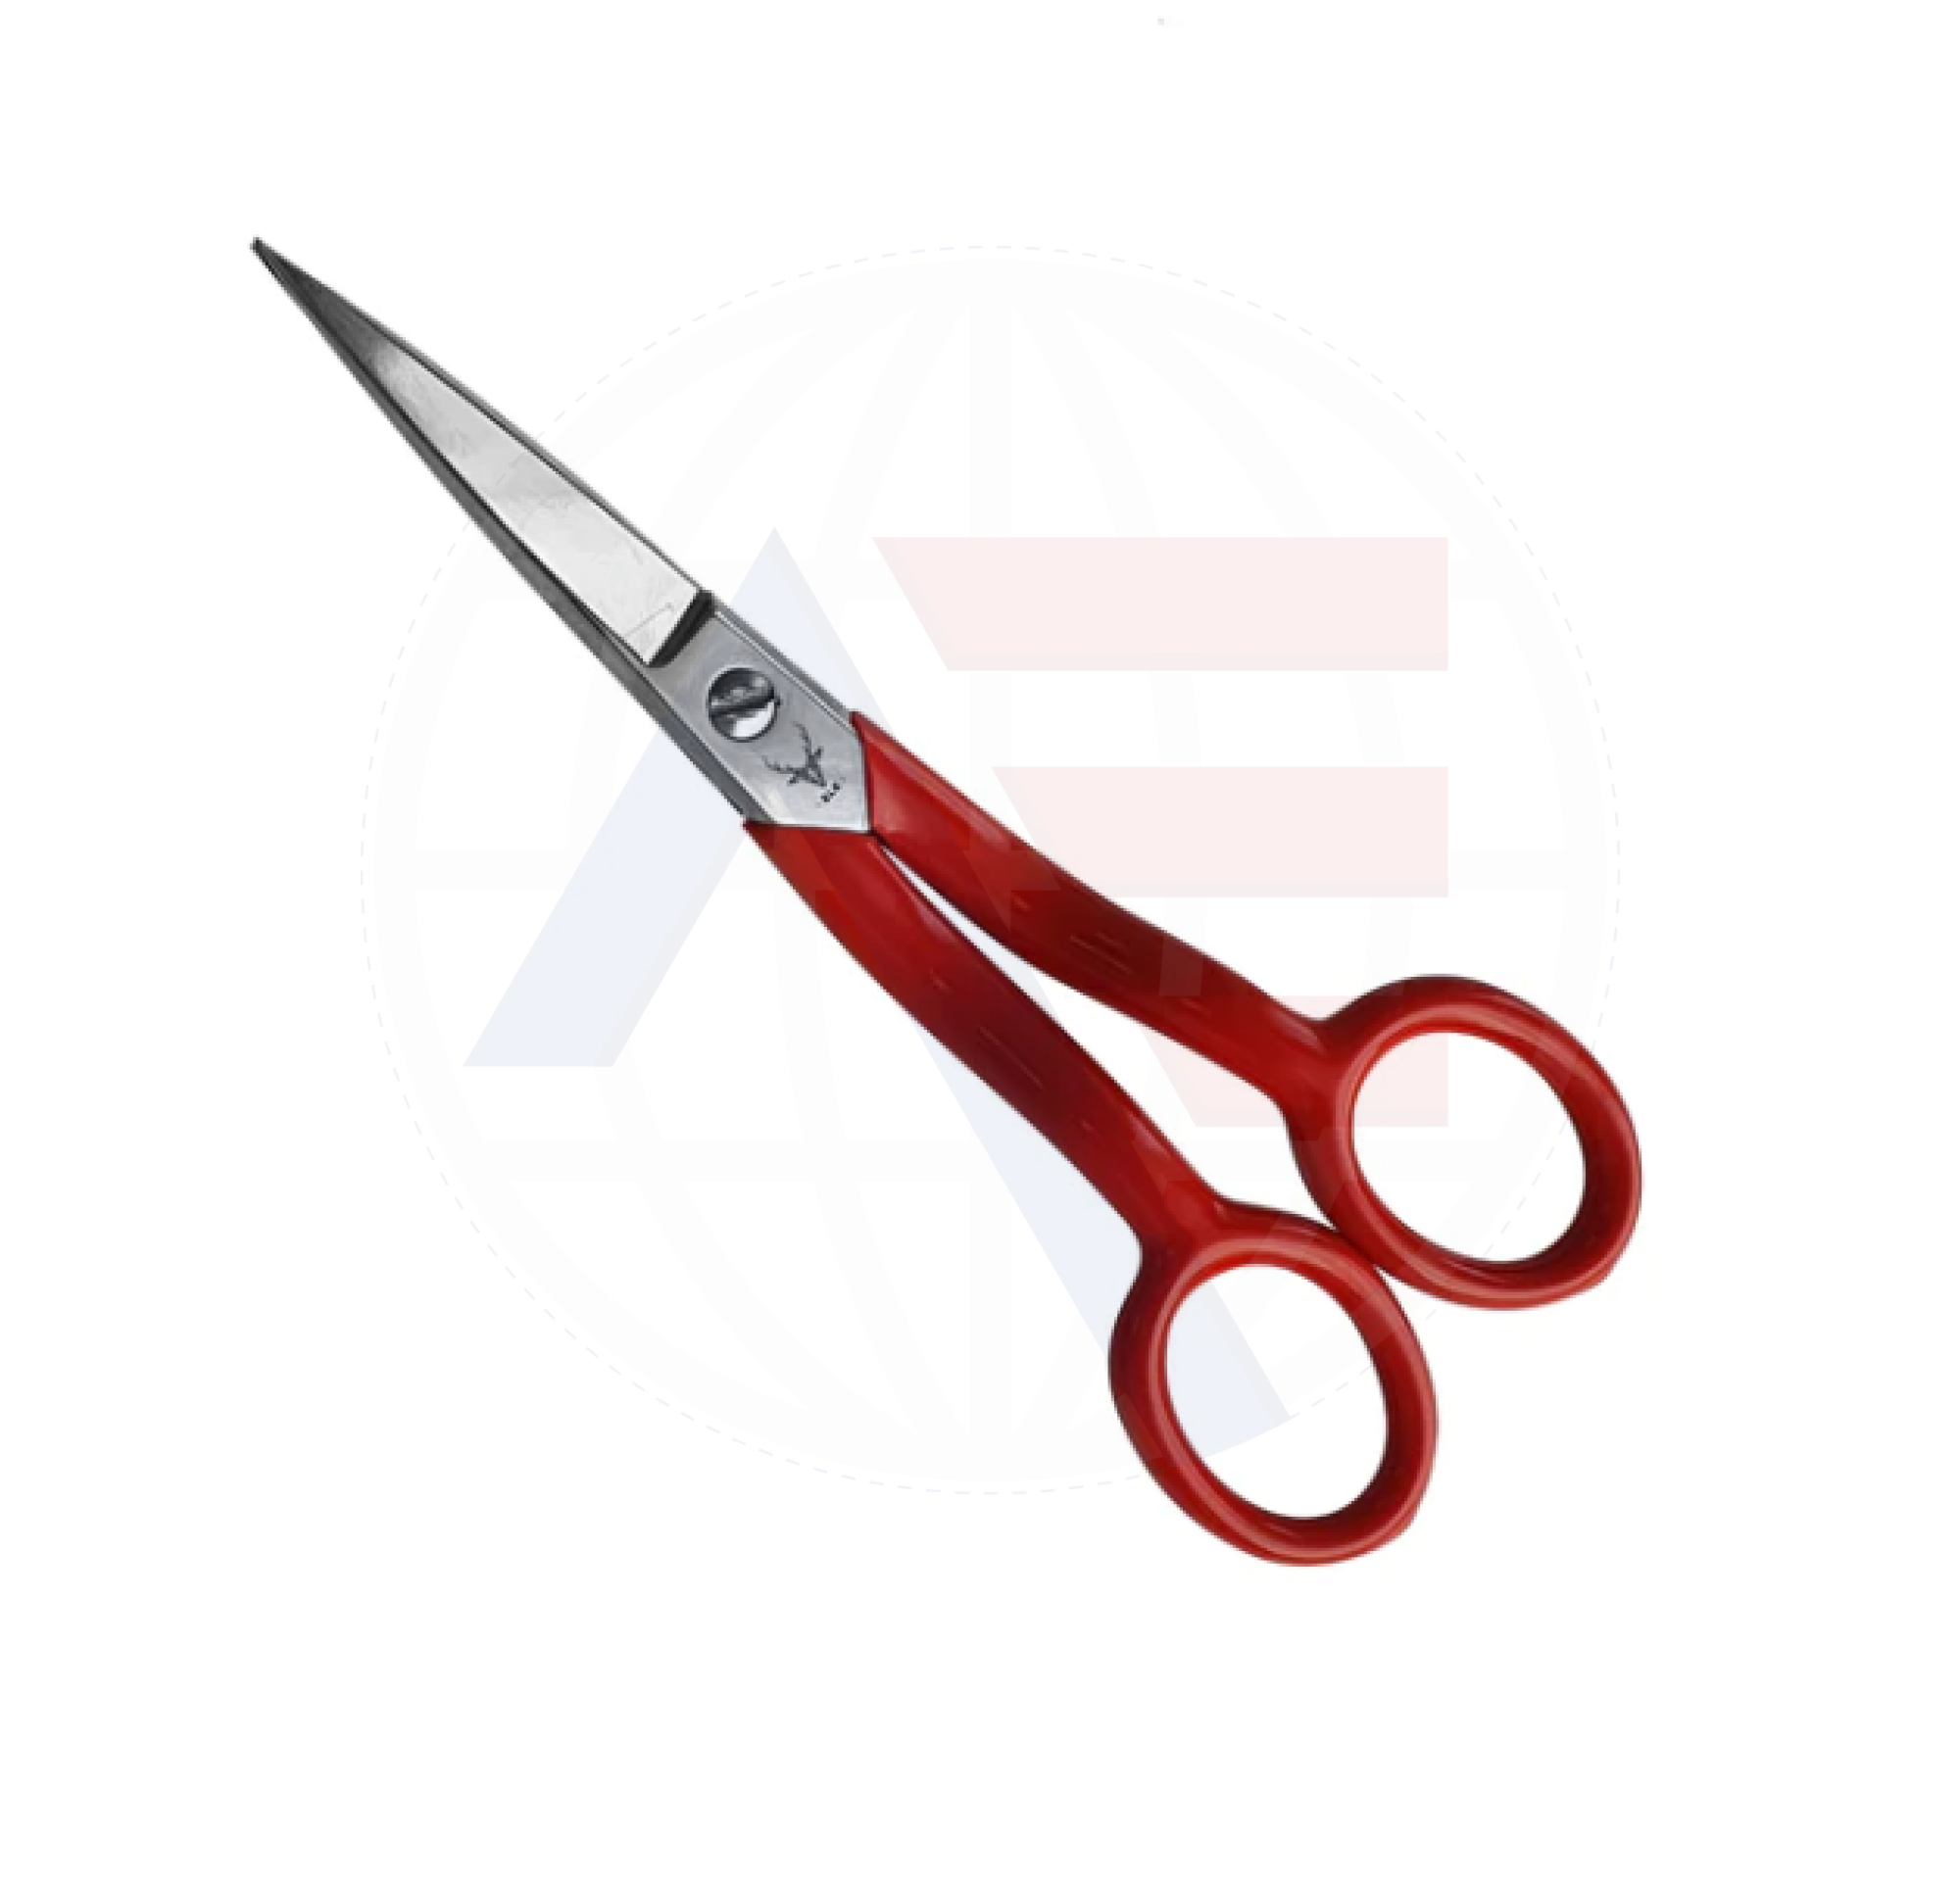 Elk 5 & 6 Carpet Napping Shears With Cranked Handles